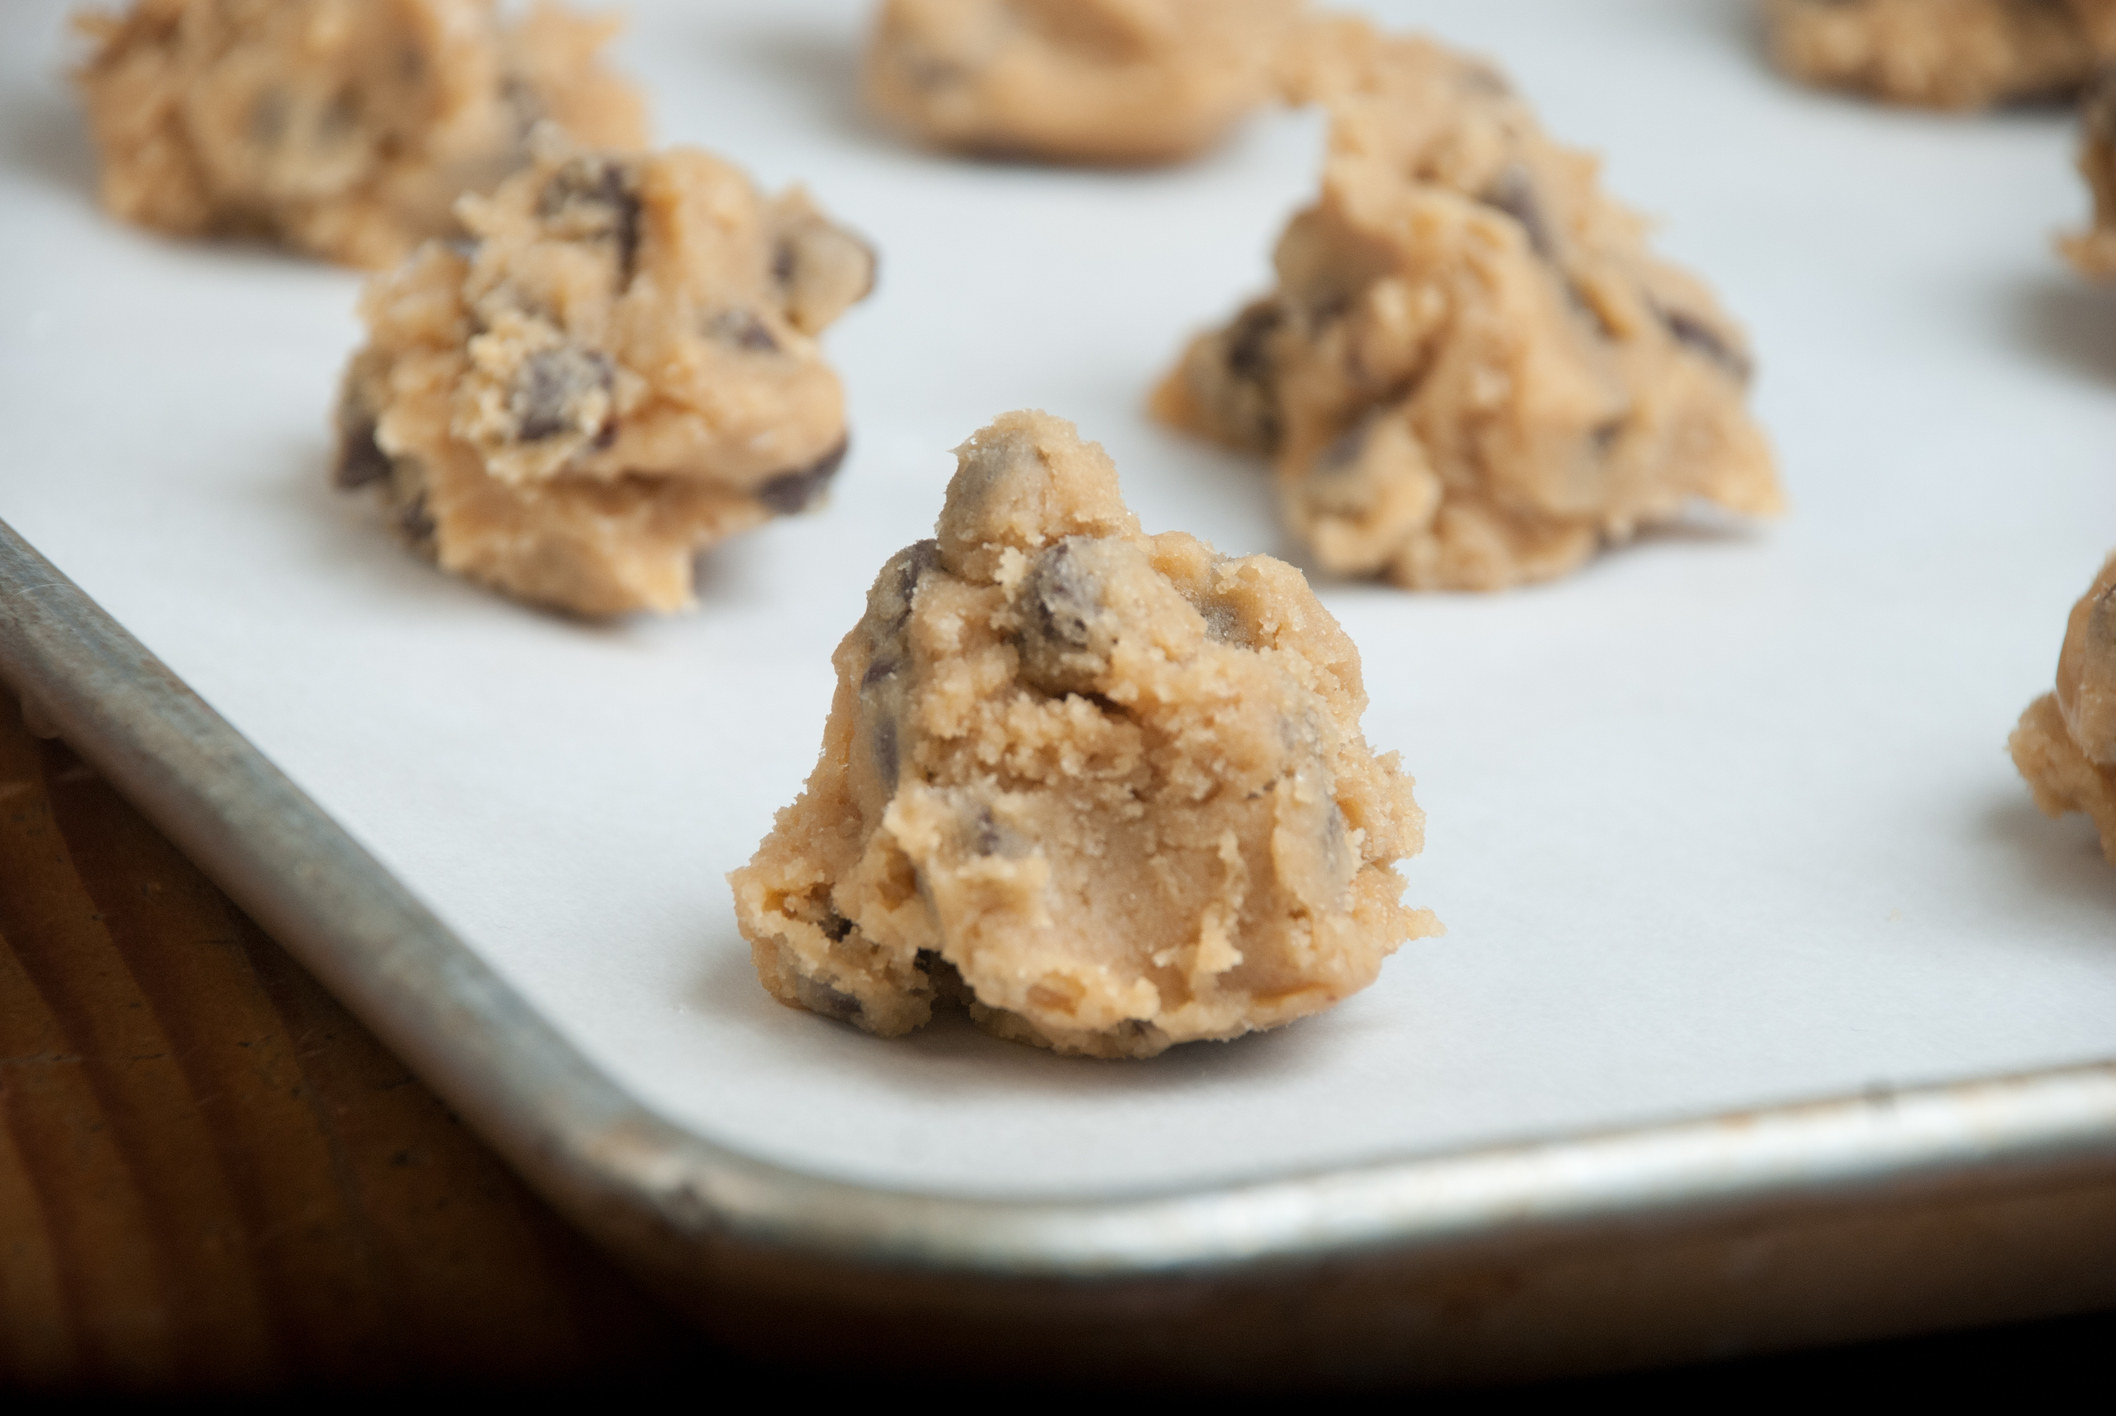 Spoonfuls of cookie dough on a baking sheet.